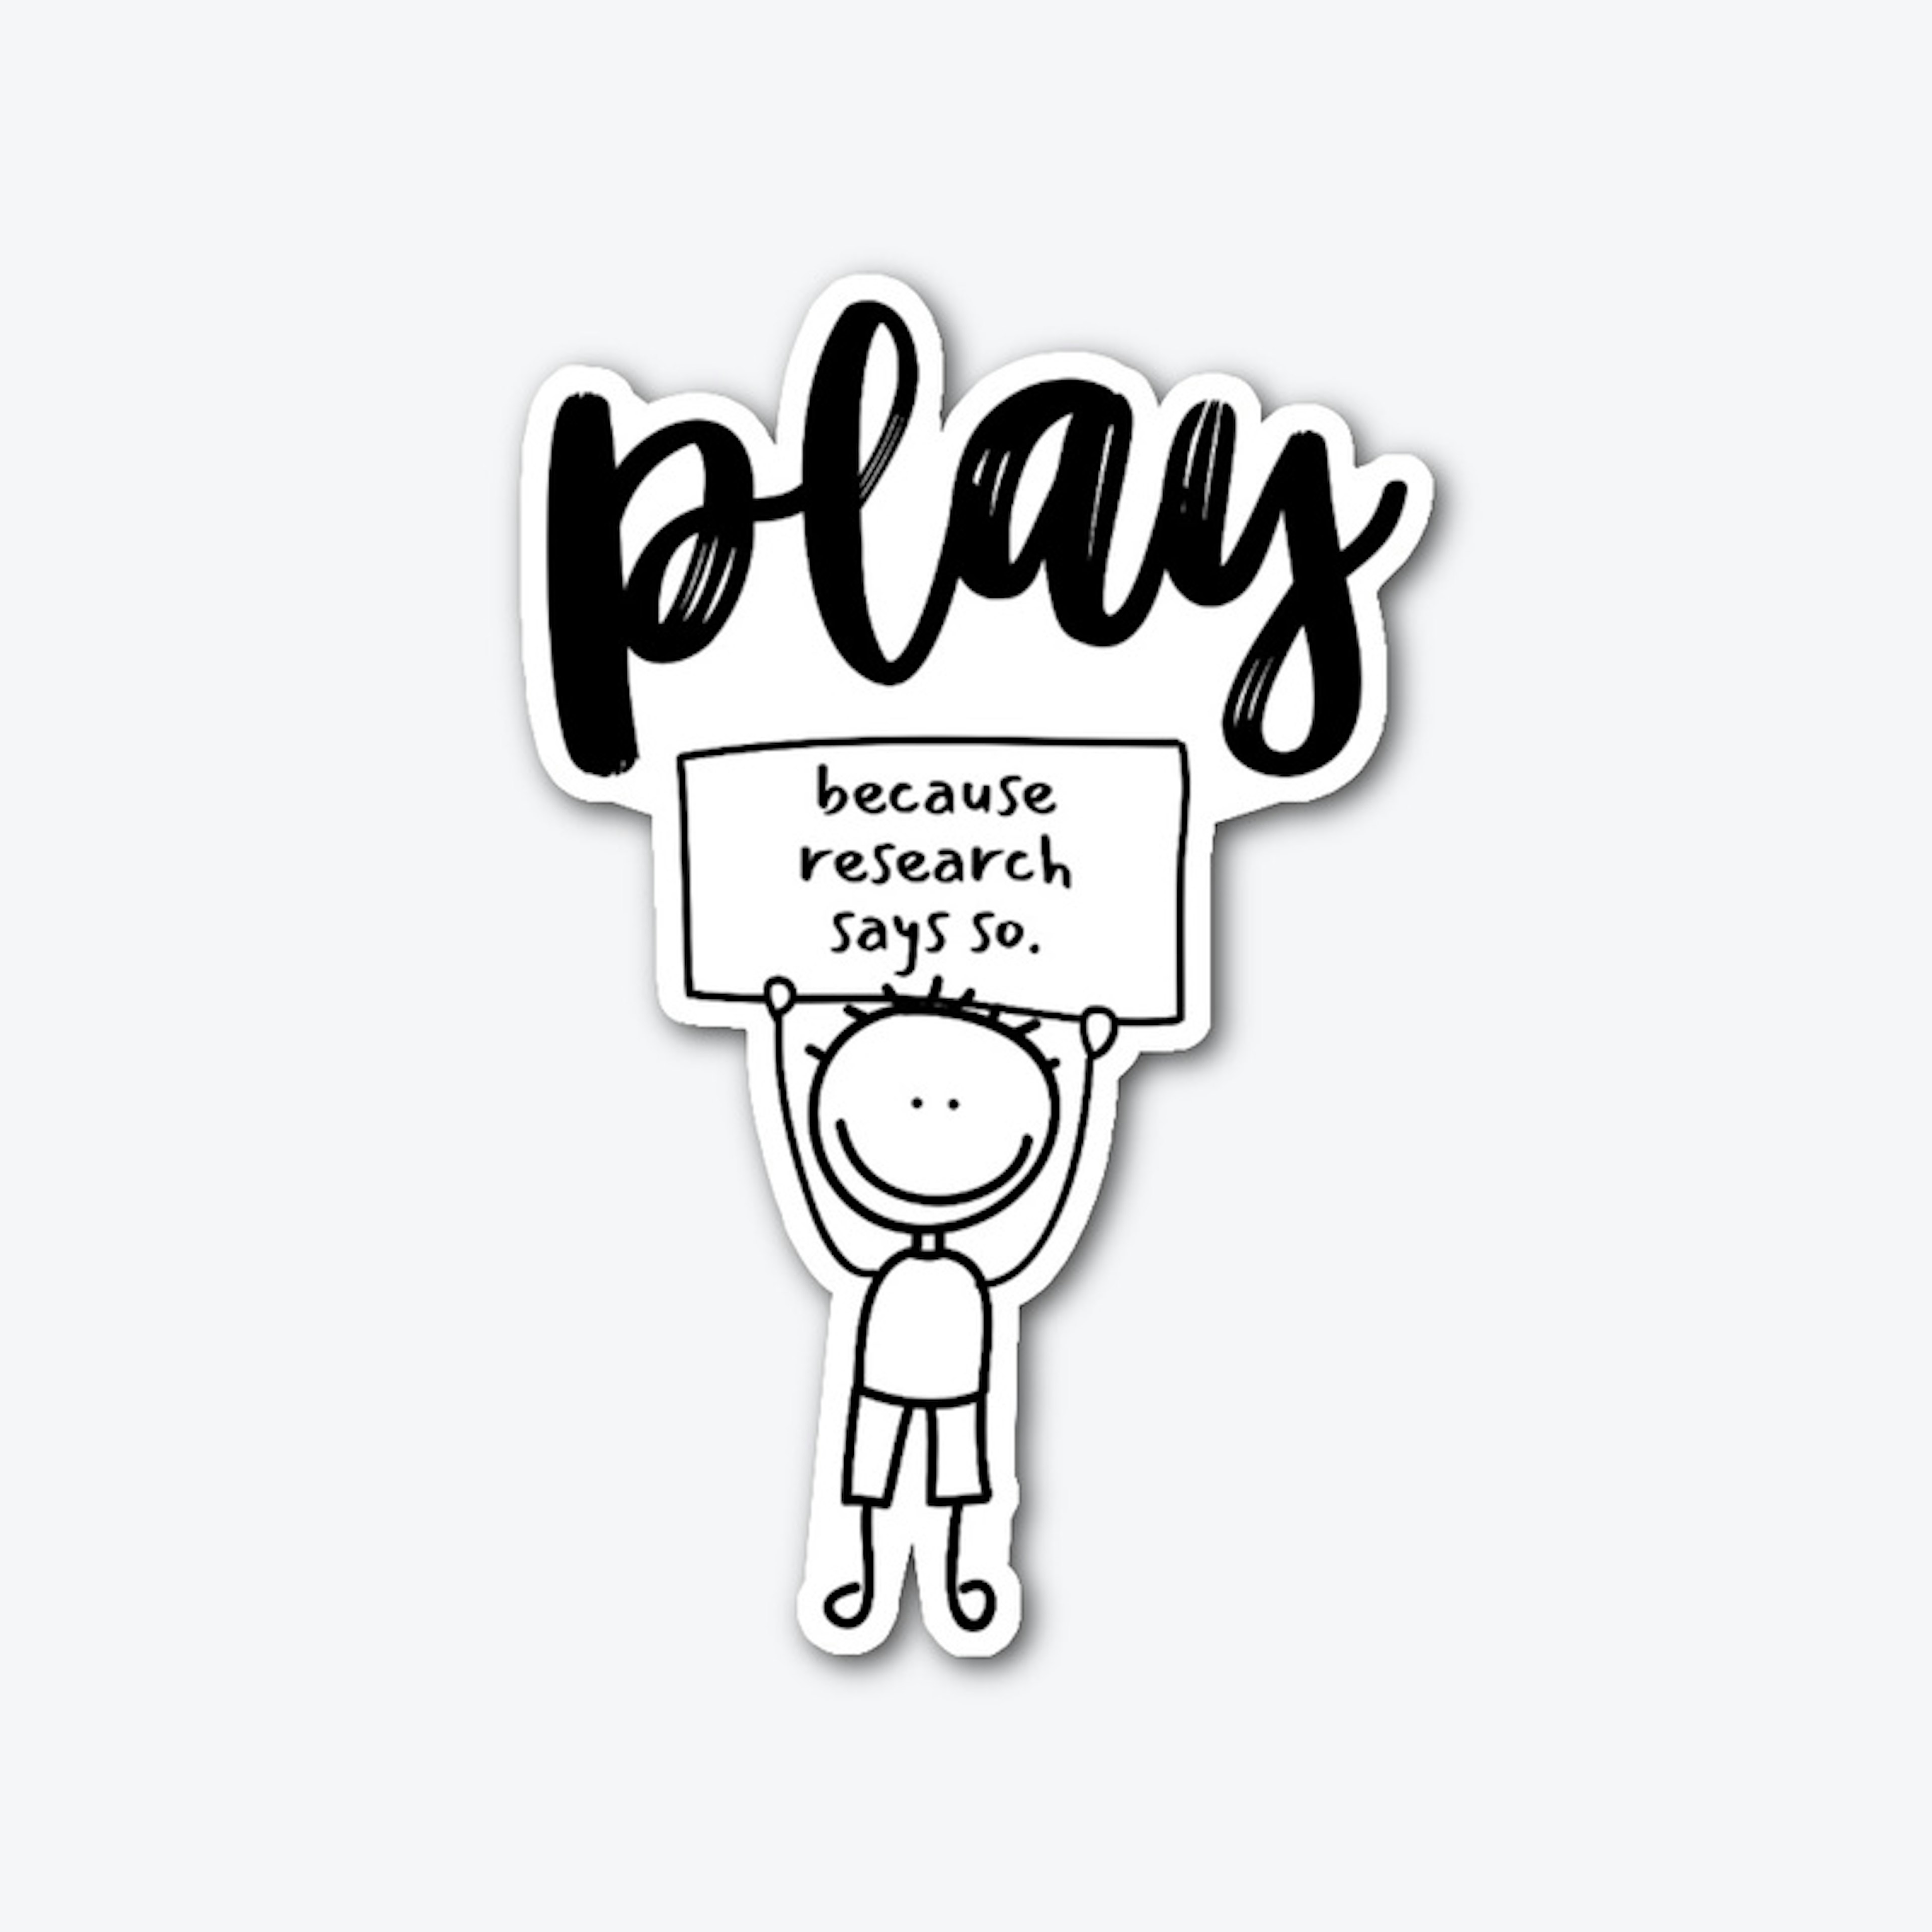 play: because research says so